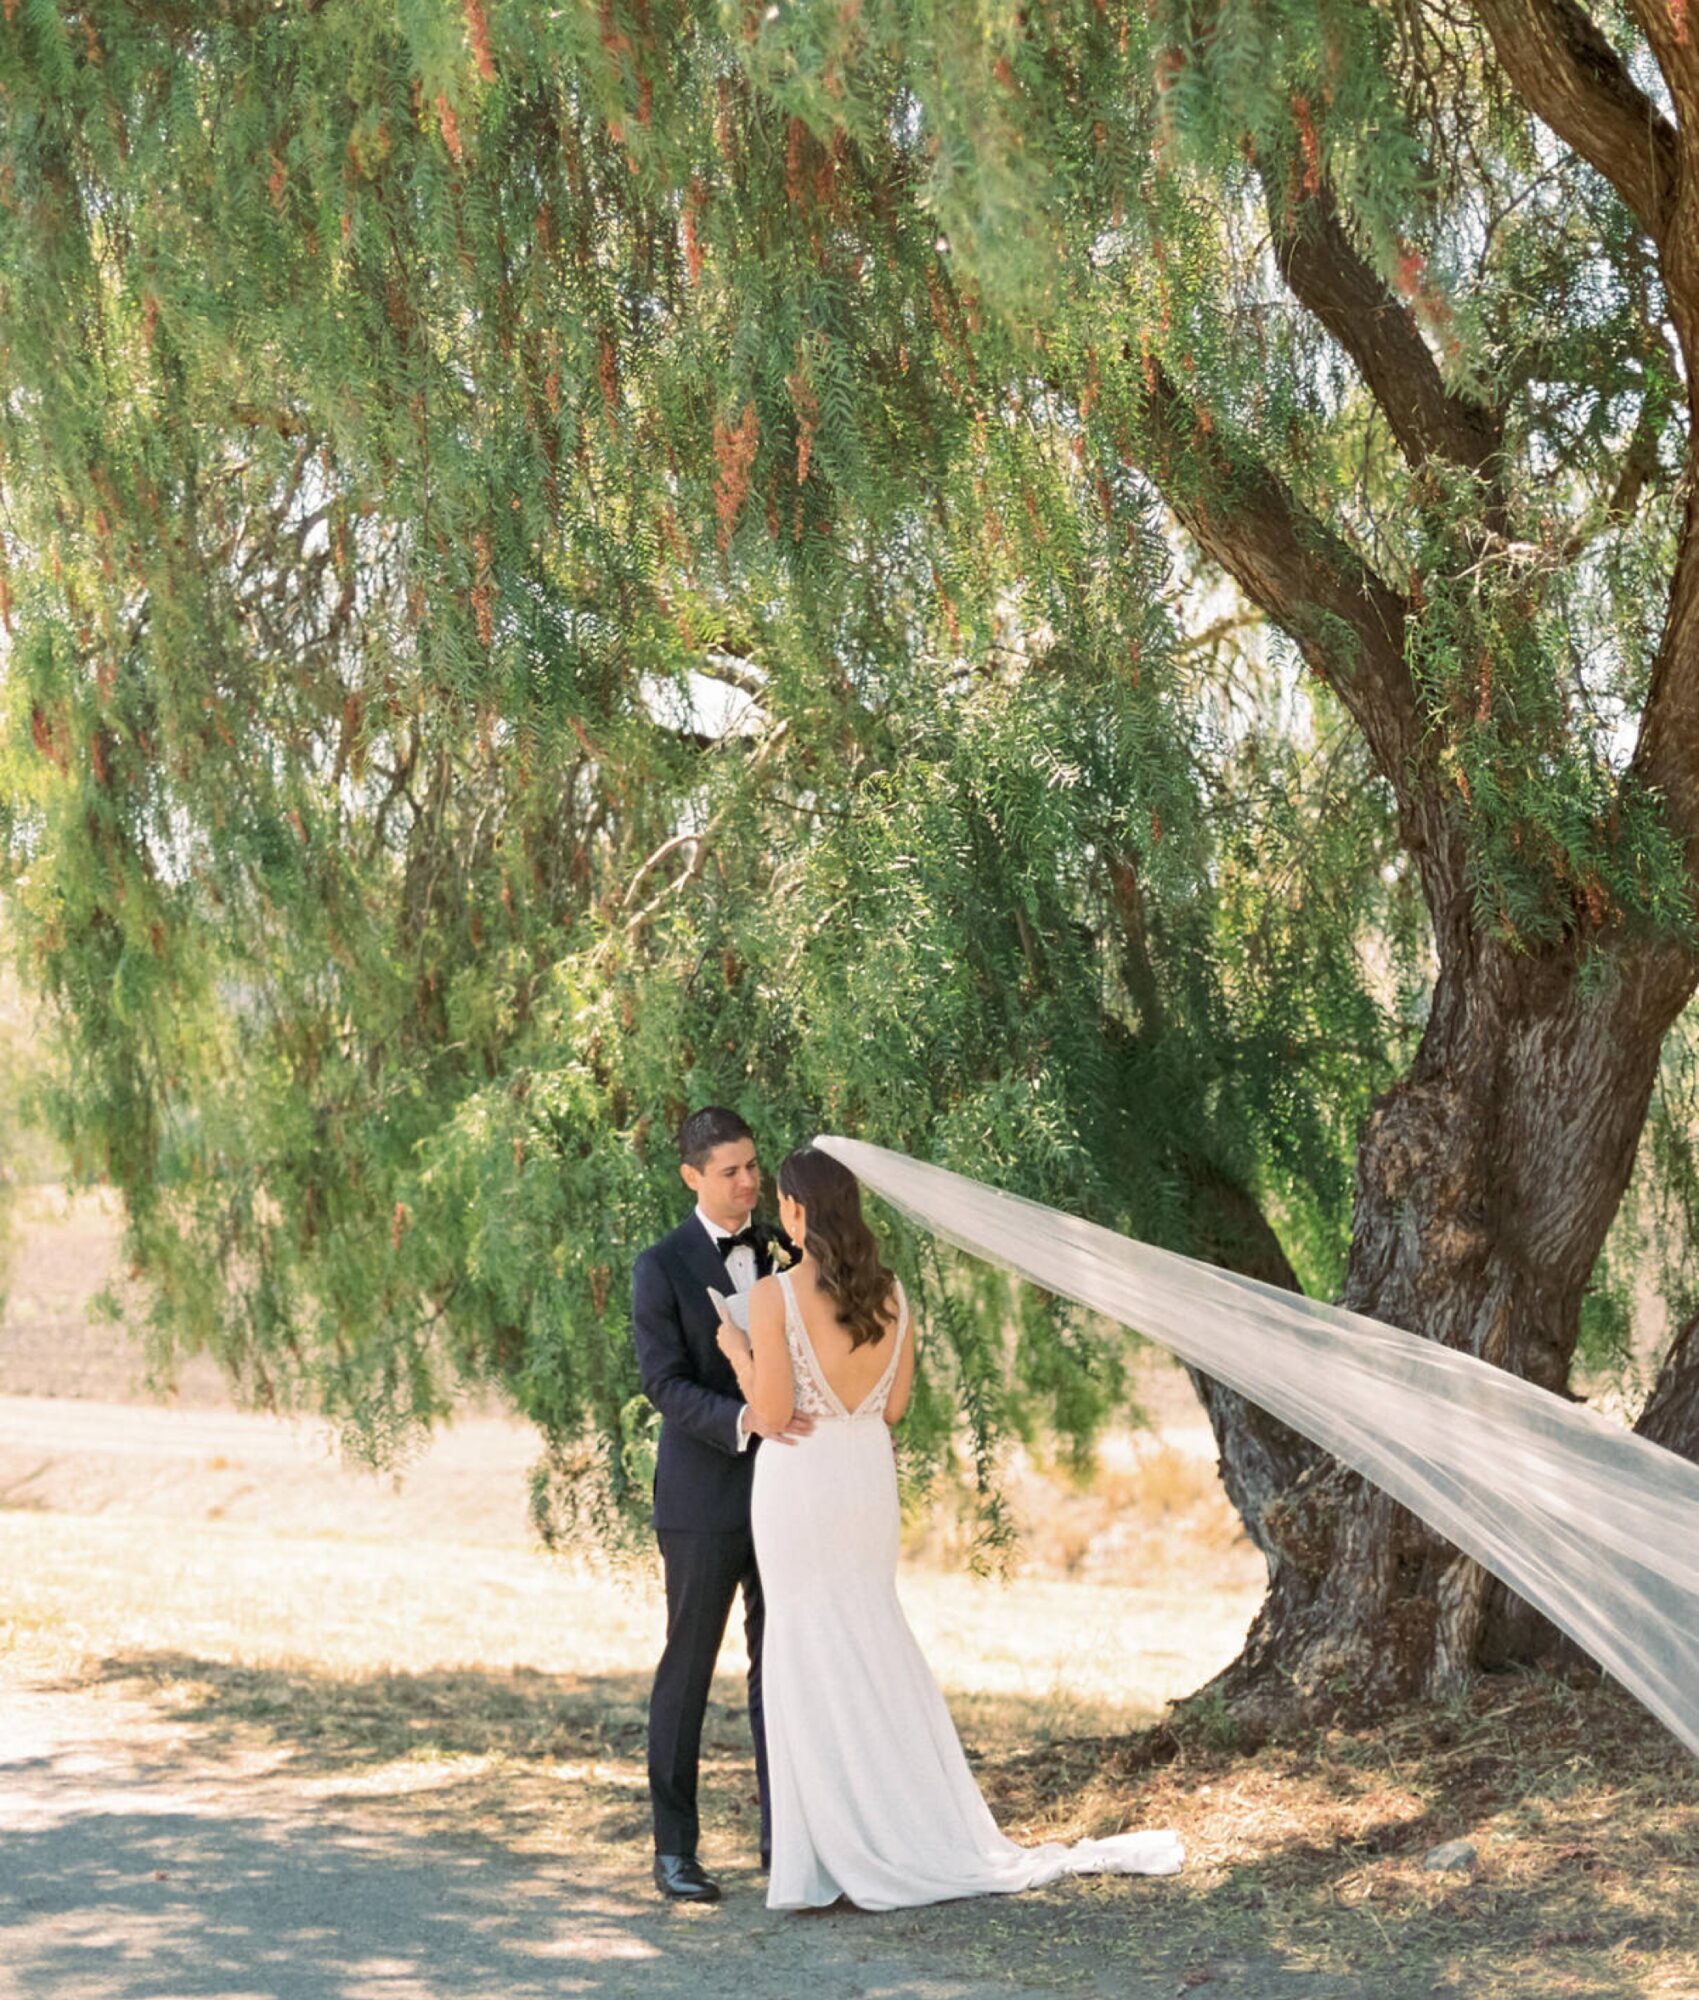 Private vow reading under a tree at the White Barn Edna Valley photographed by san luis obispo wedding photographers jessica sofranko